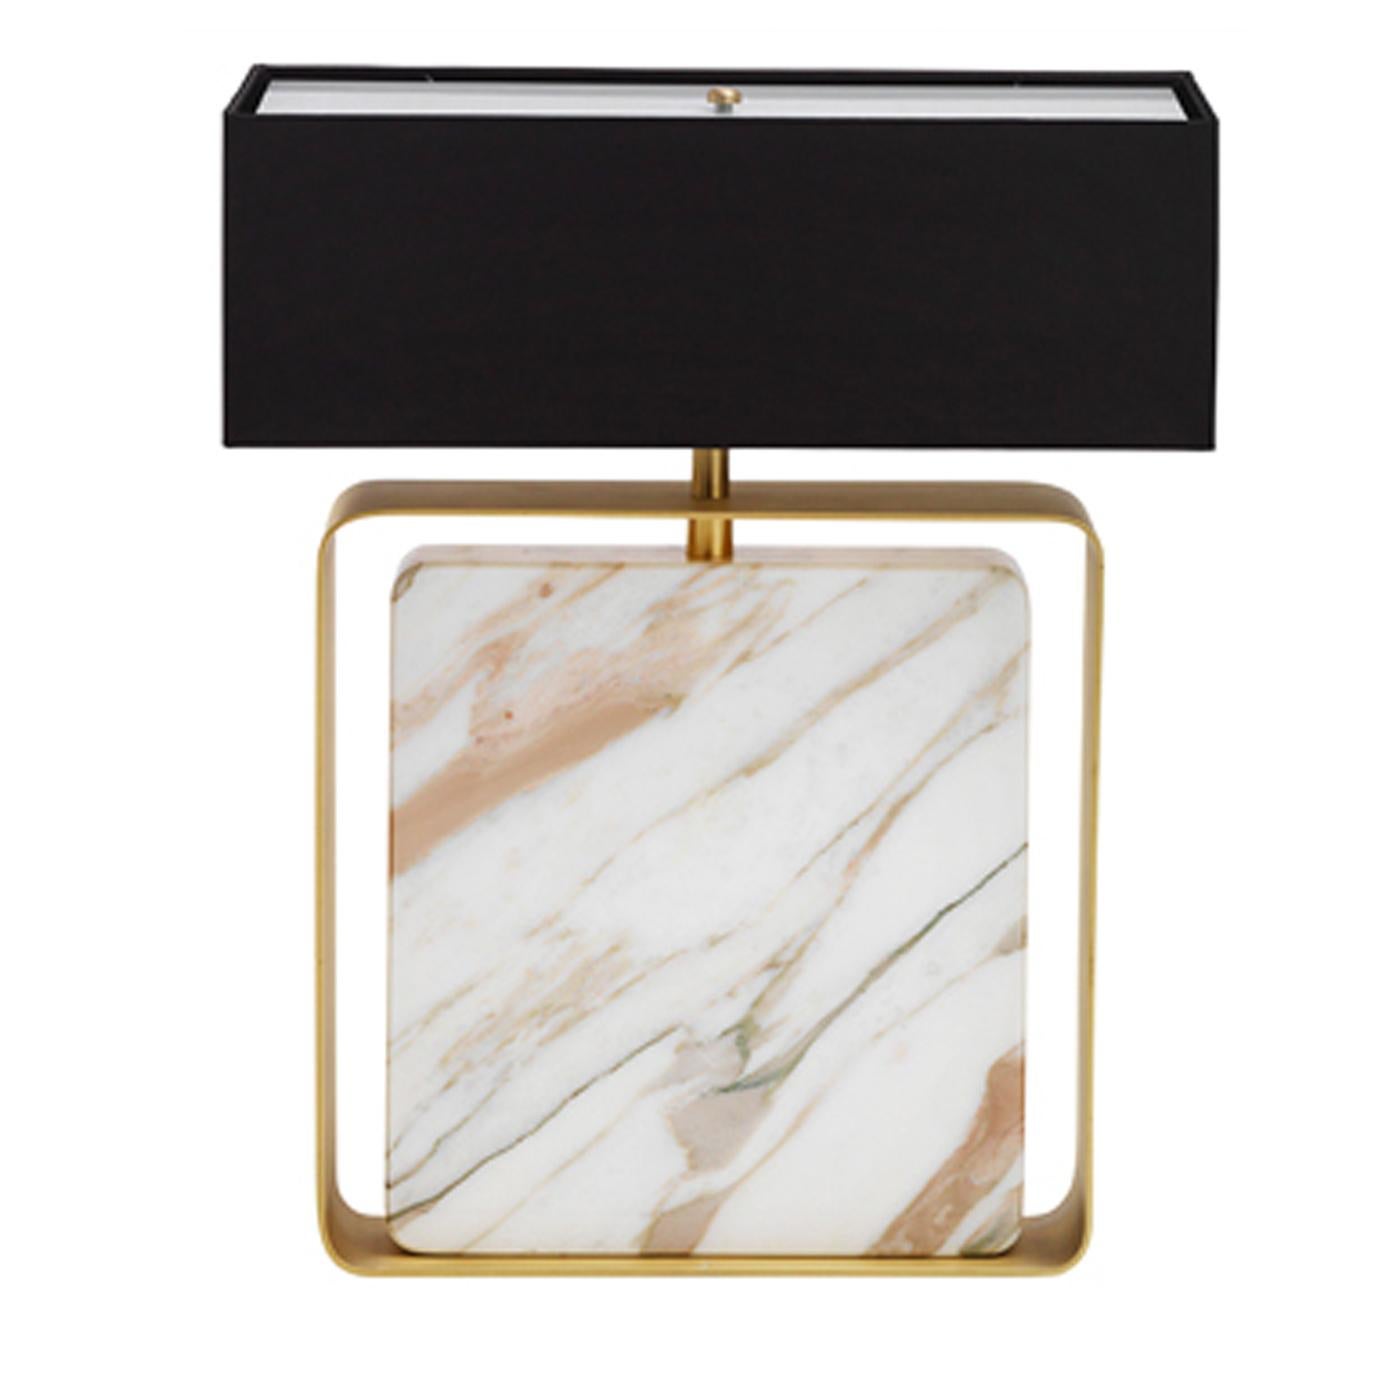 Completing a small collection of marble table lamps, the Caccia square table lamp is a luxe piece for contemporary living spaces. Featuring a square slab of Calcutta gold marble with rounded corners, the lamp is accented with a satin-finish brass